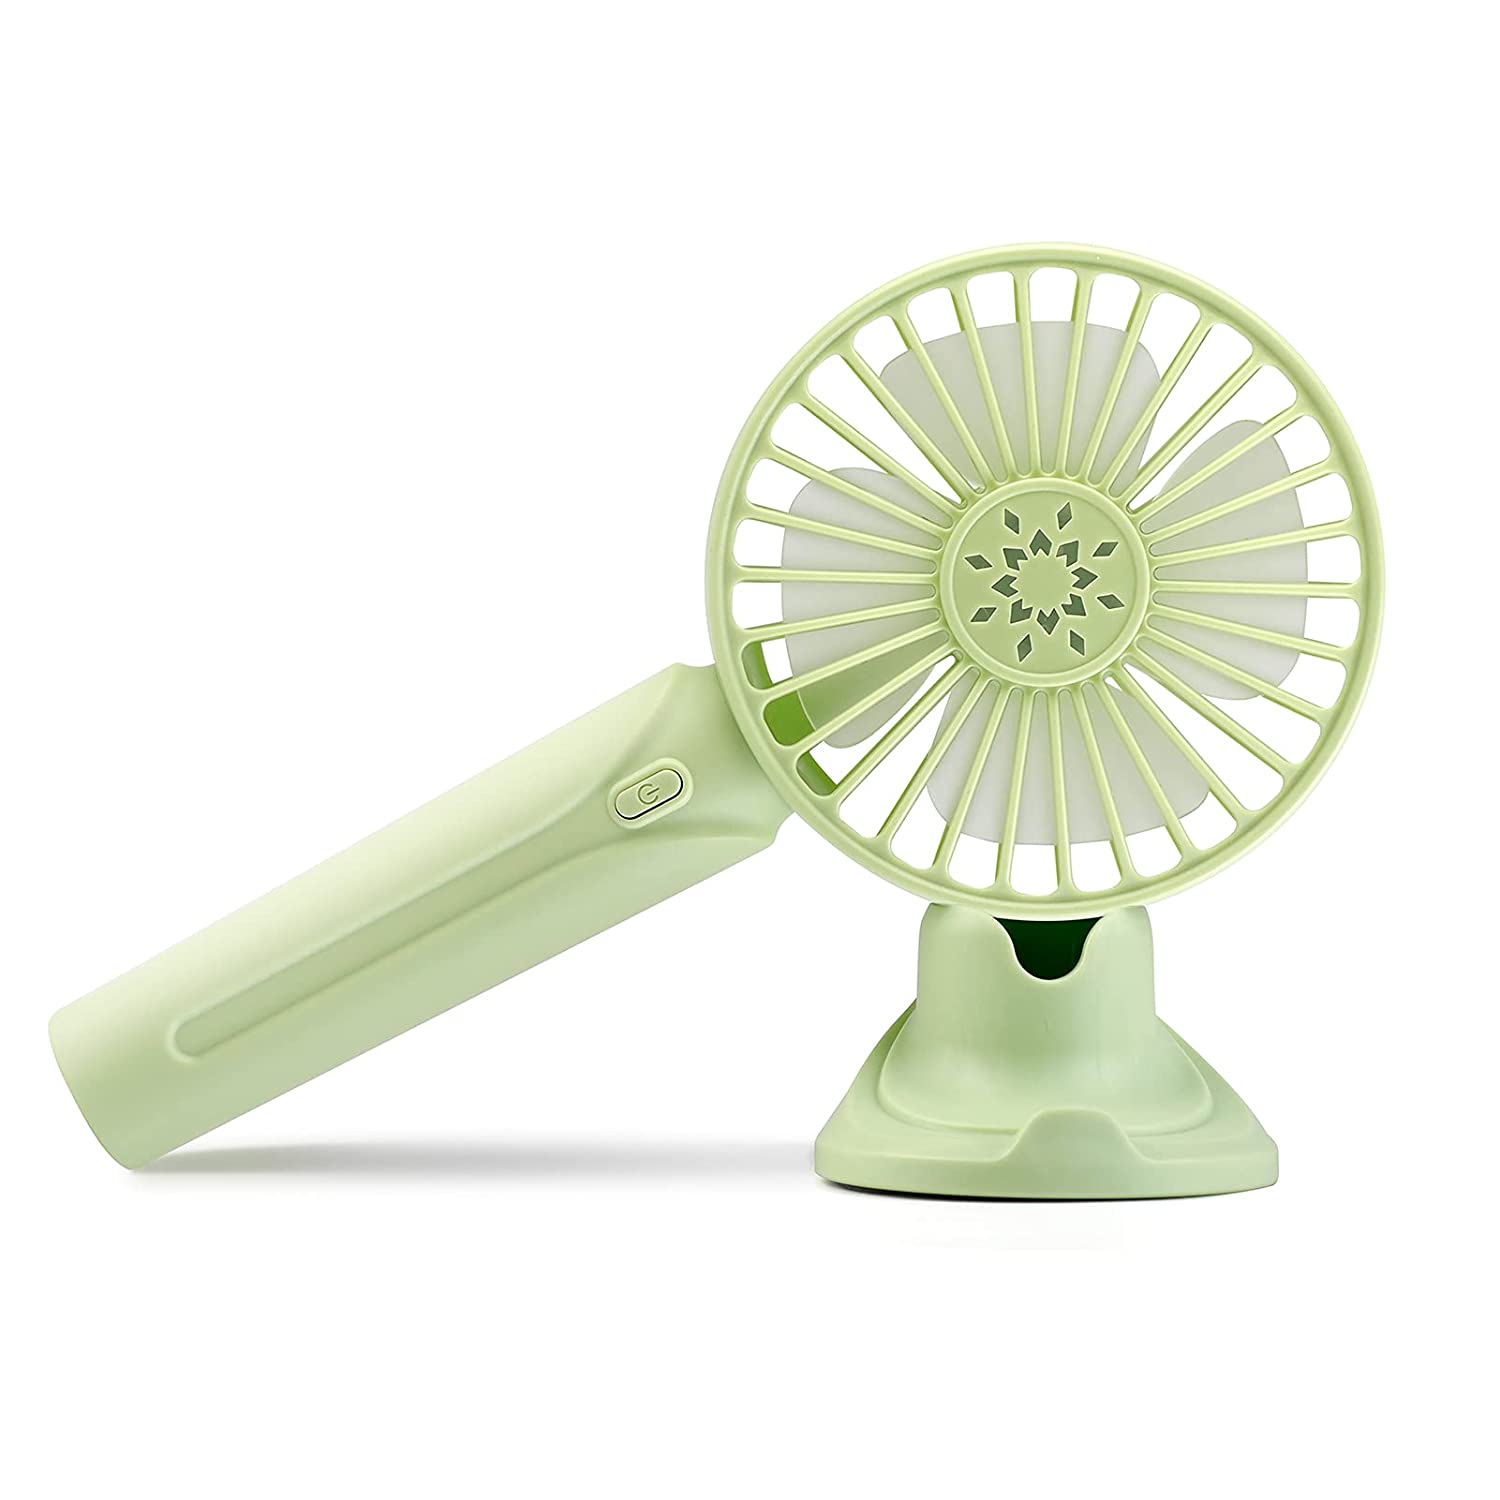 USB Rechargable Portable Handheld Personal Wind Cooling 3 Adjustable Speed